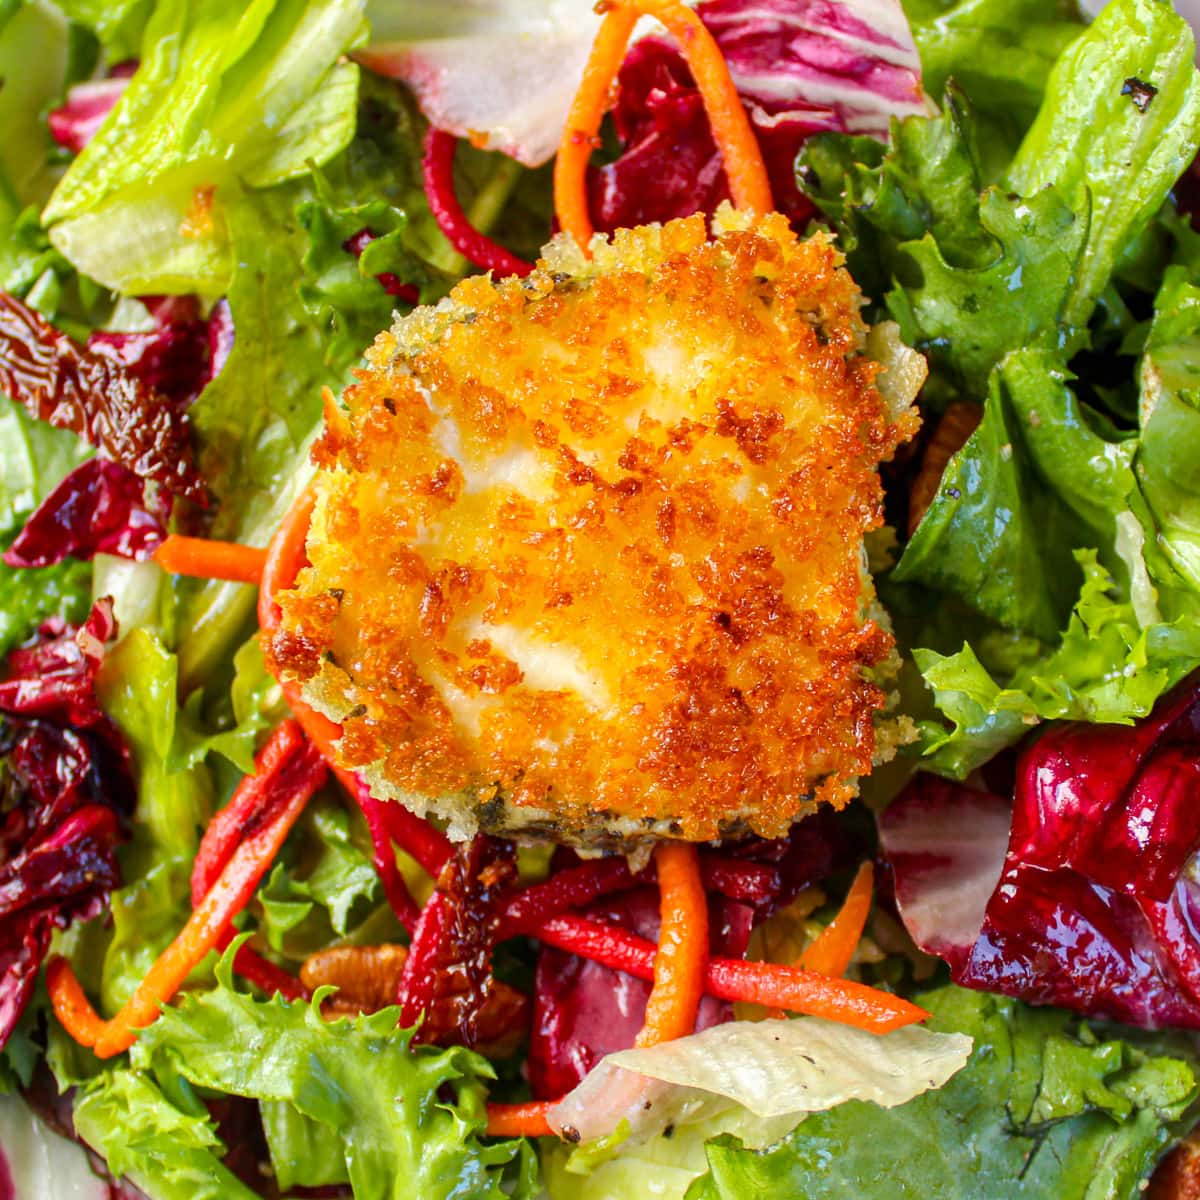 Warm Crusted Goat Cheese Salad (Pan-Fried)